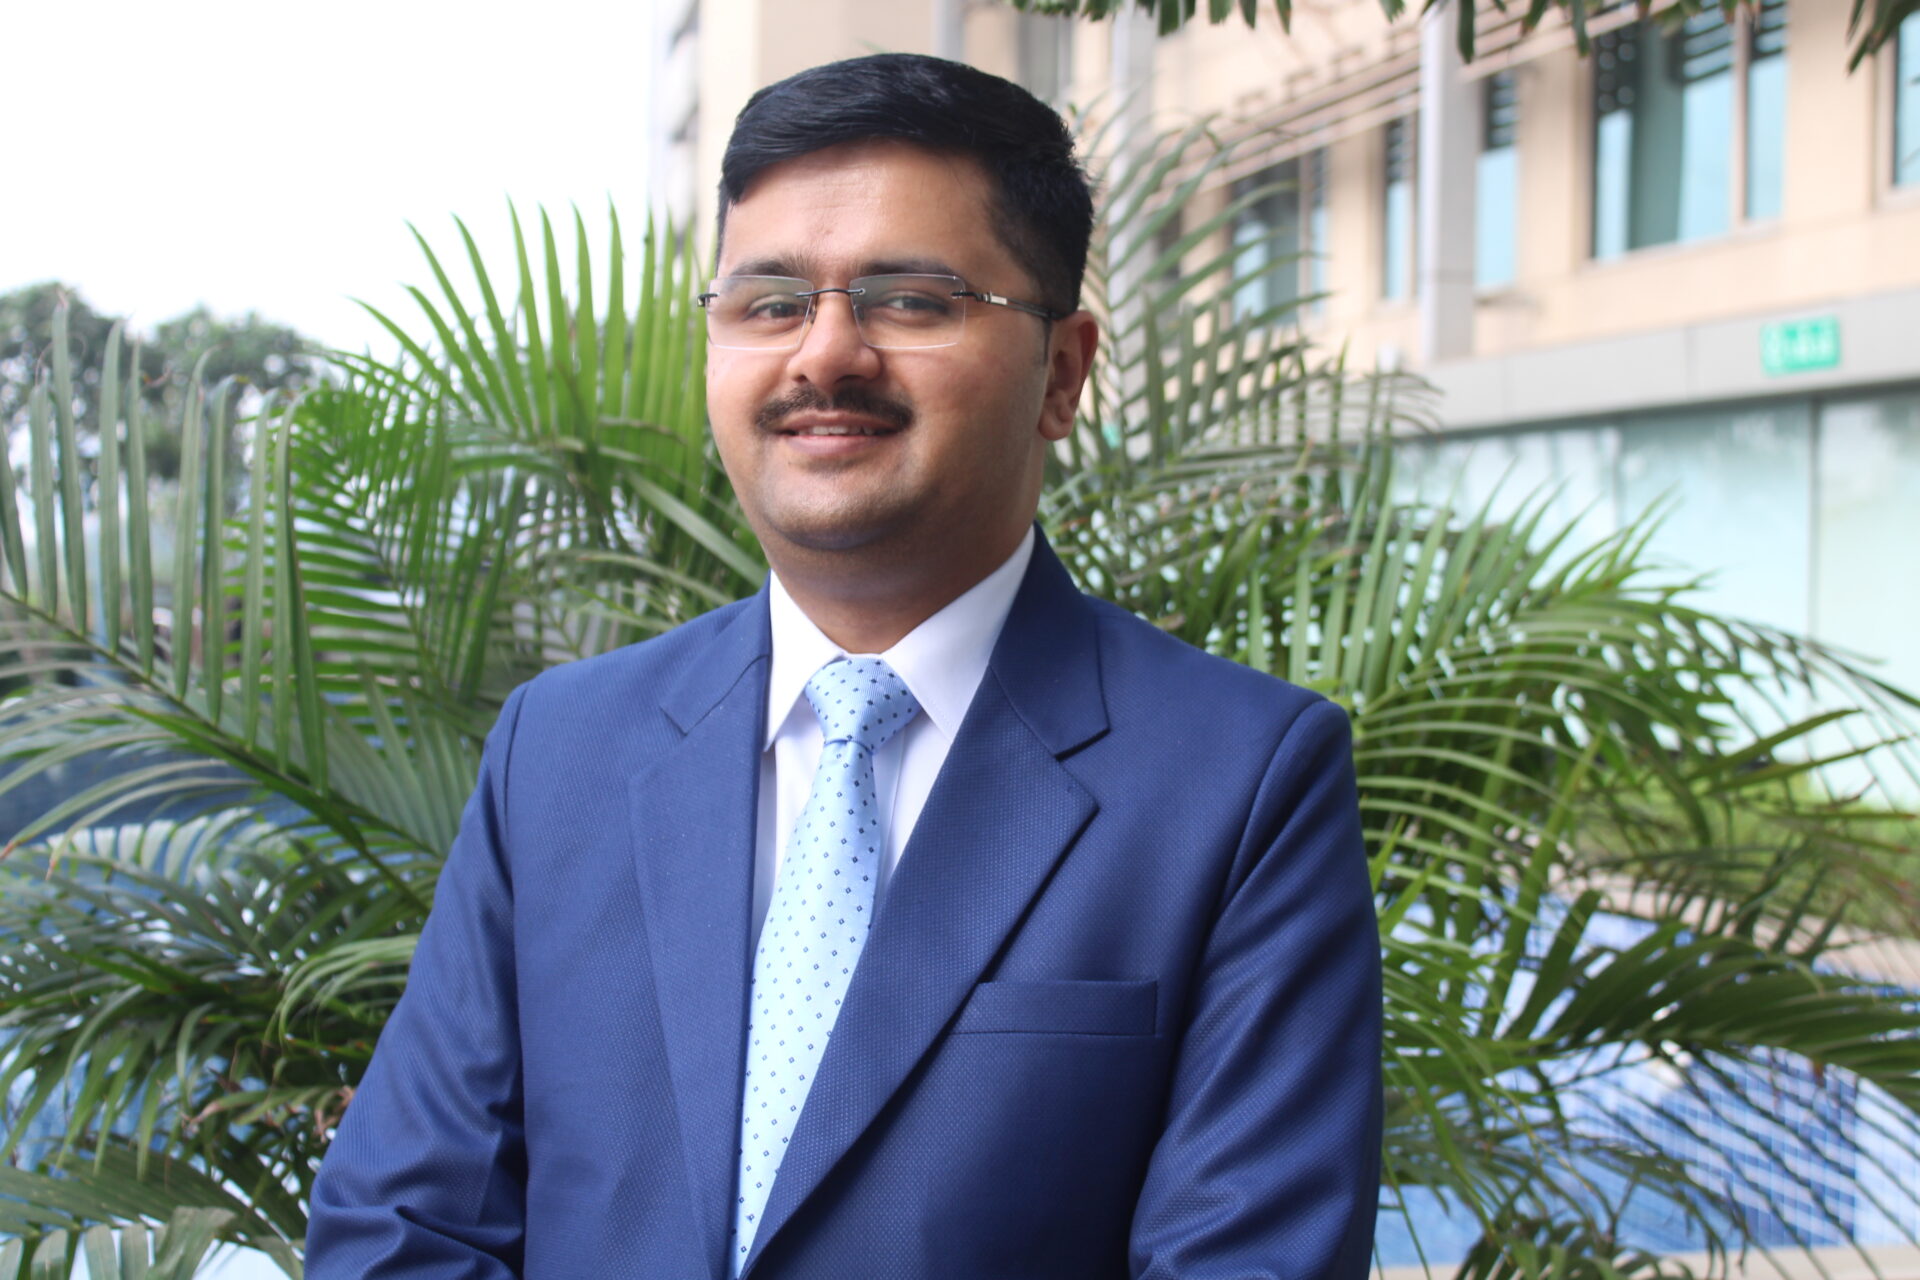 Crowne Plaza Ahmedabad City Centre appoints Manish Joshi as Executive Housekeeper​